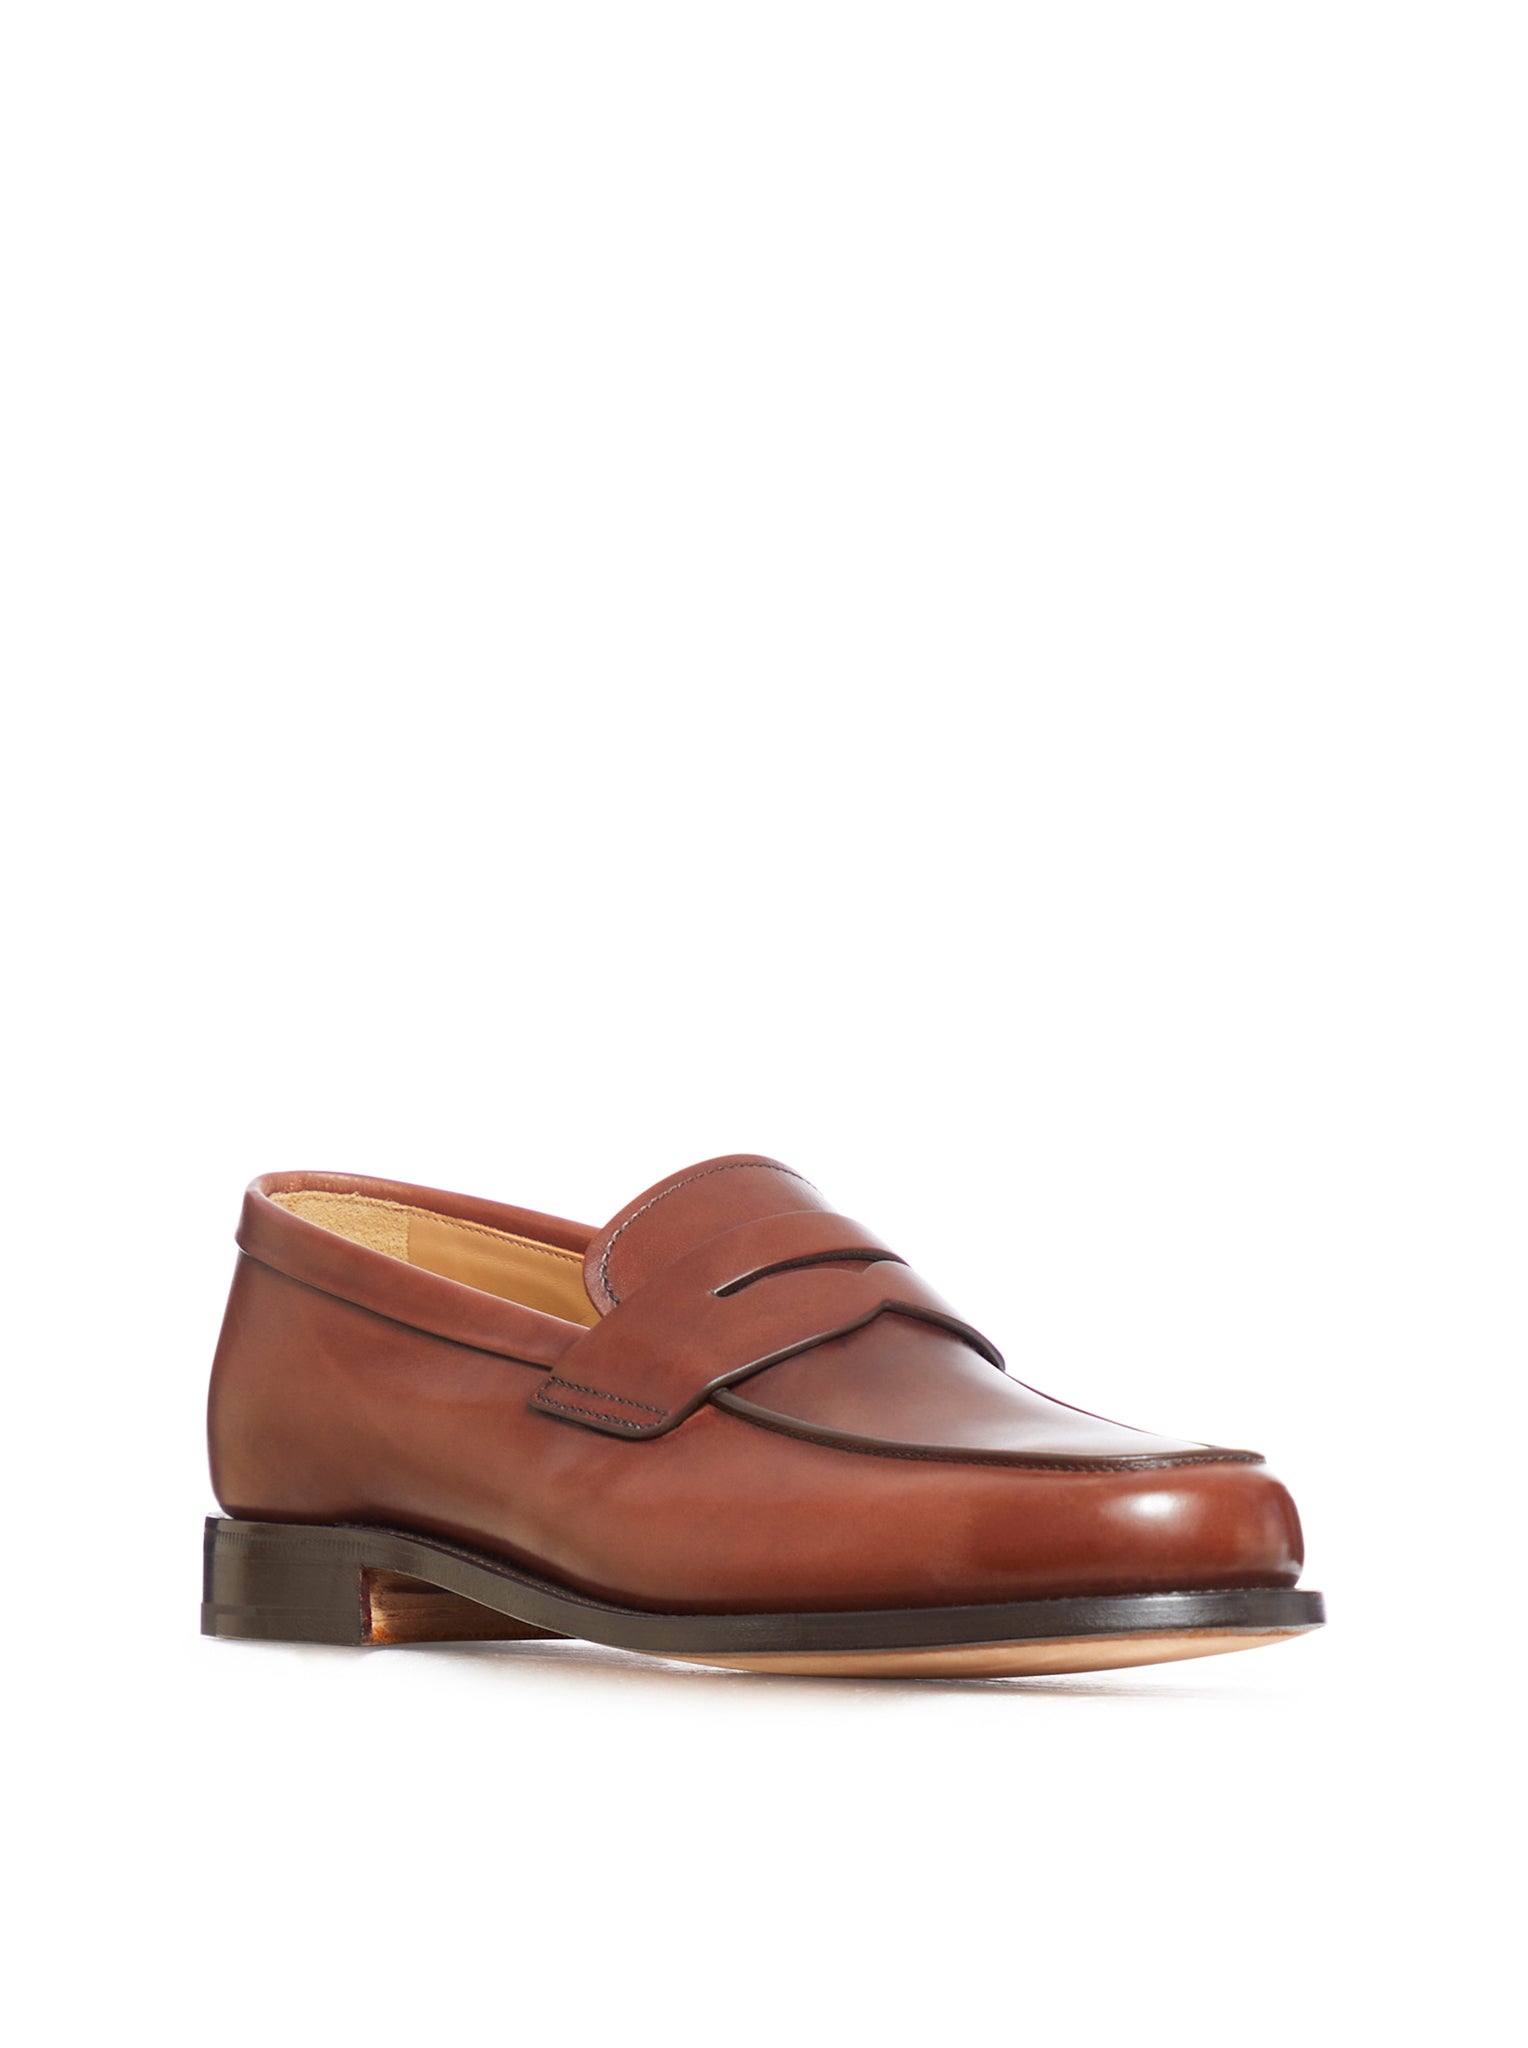 Milford leather penny loafers